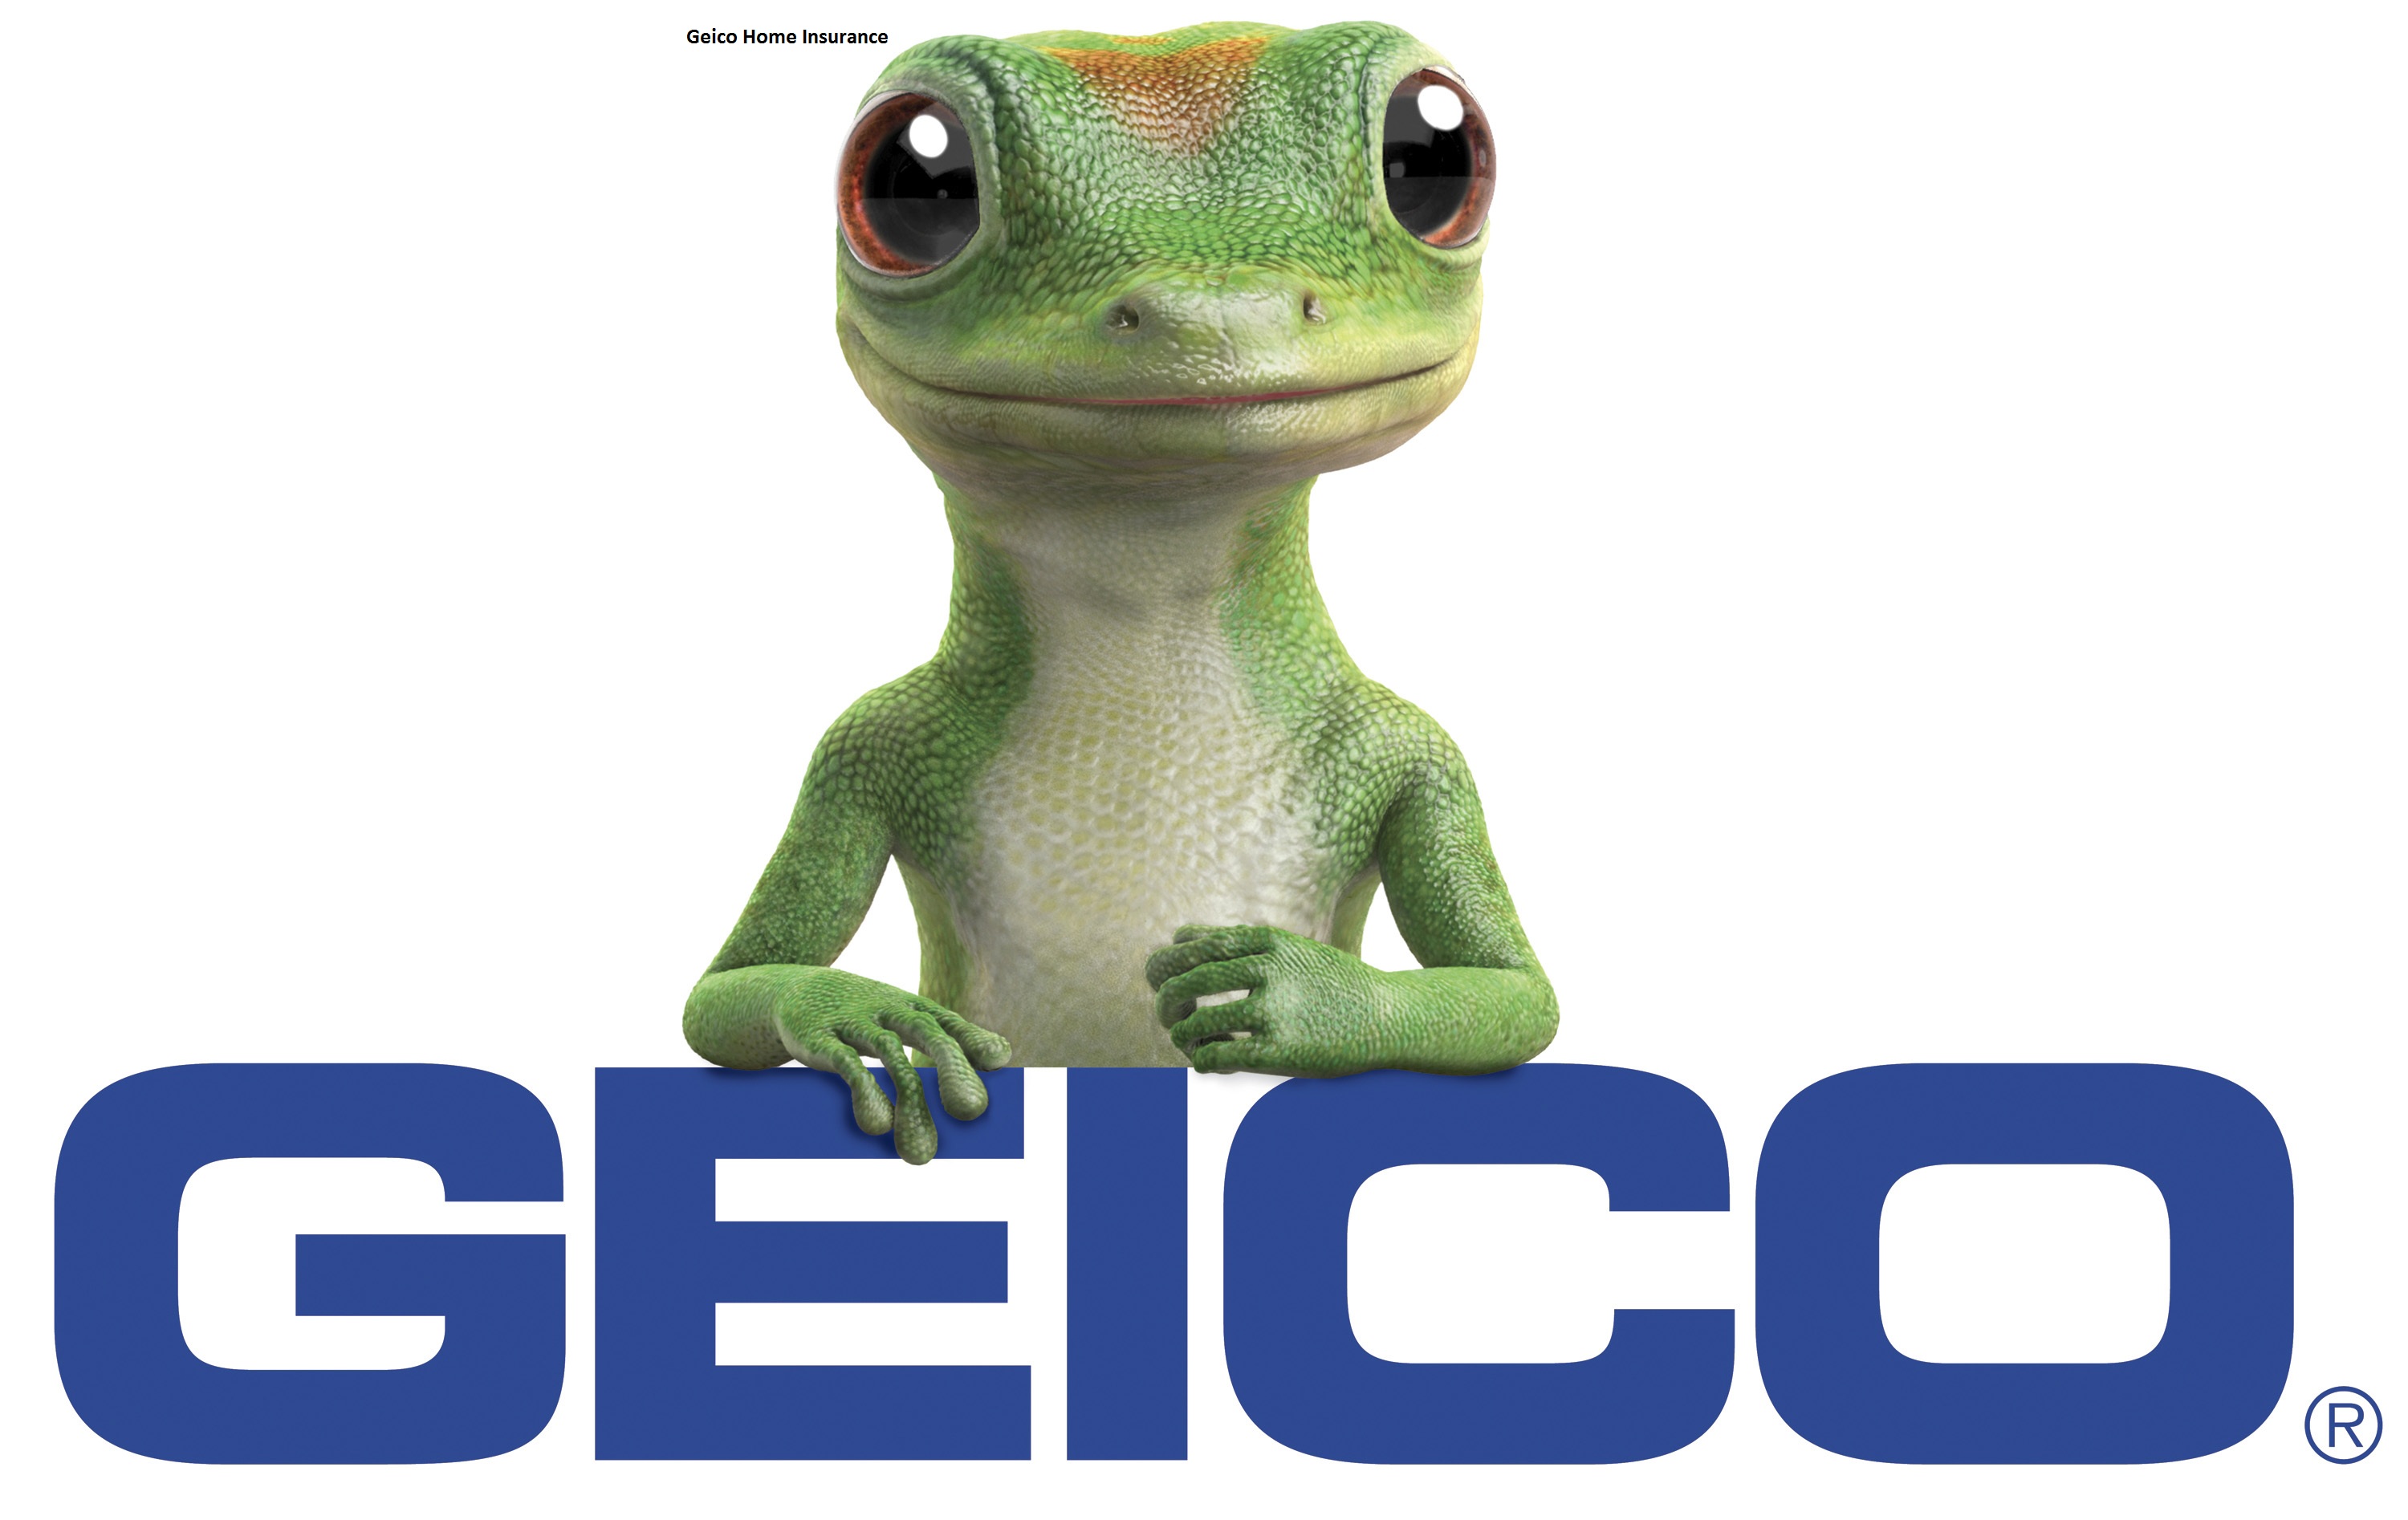 Geico Home Insurance Reviews For Builders Risk Vacant House